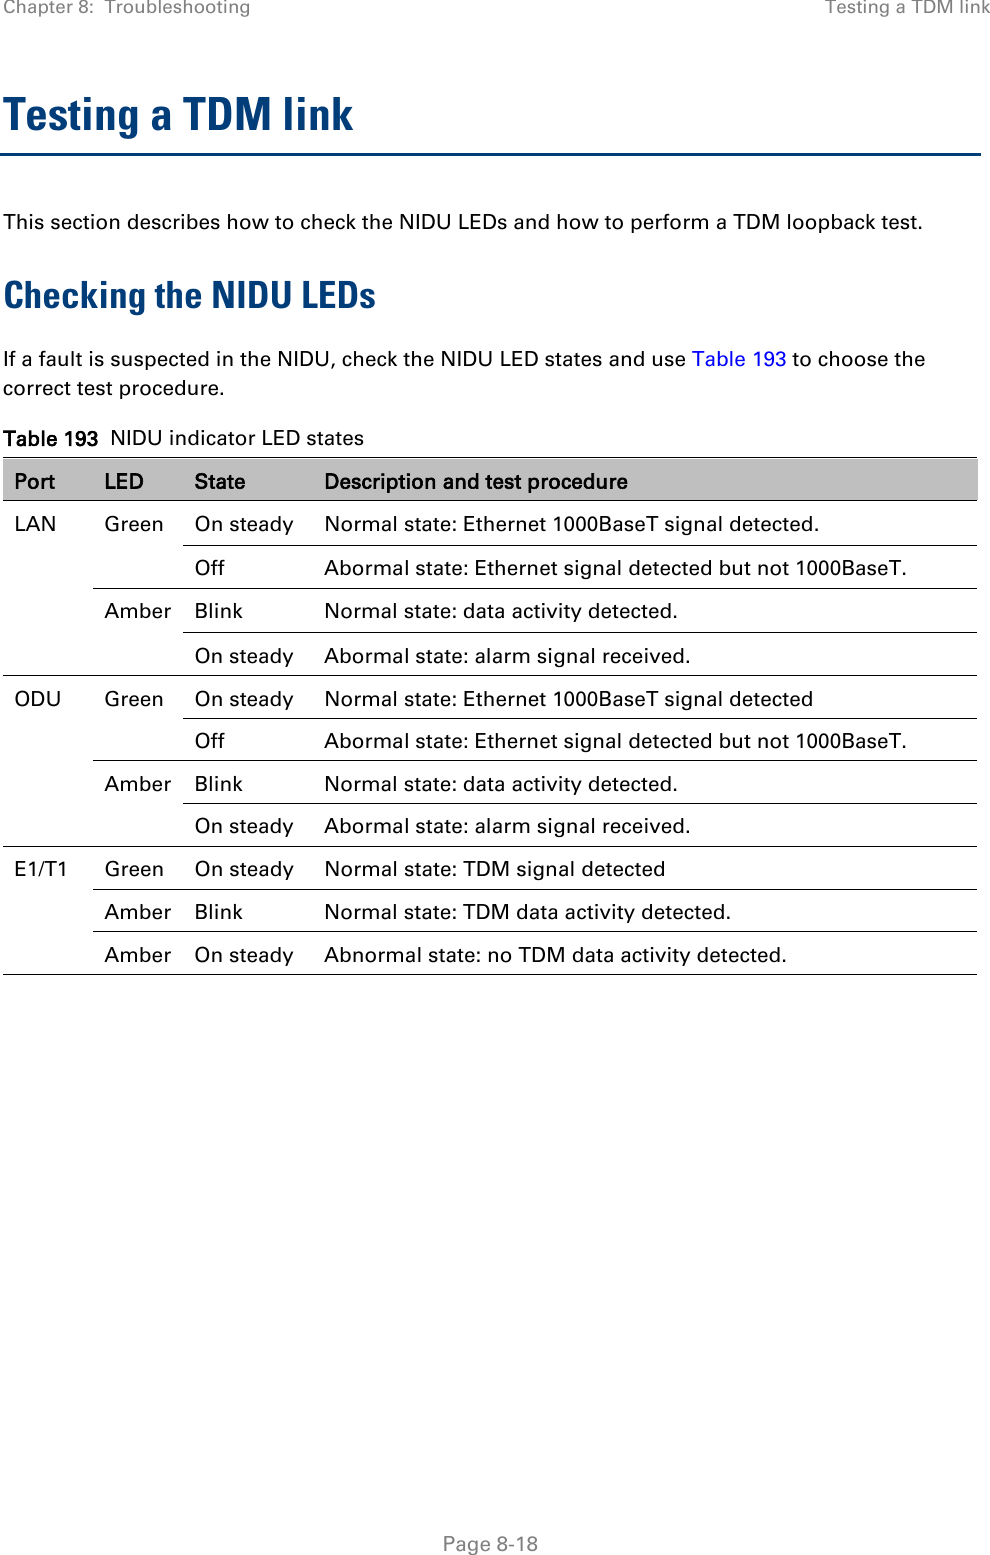 Chapter 8:  Troubleshooting Testing a TDM link  Testing a TDM link This section describes how to check the NIDU LEDs and how to perform a TDM loopback test. Checking the NIDU LEDs If a fault is suspected in the NIDU, check the NIDU LED states and use Table 193 to choose the correct test procedure. Table 193  NIDU indicator LED states Port LED State Description and test procedure LAN Green On steady Normal state: Ethernet 1000BaseT signal detected. Off Abormal state: Ethernet signal detected but not 1000BaseT. Amber Blink Normal state: data activity detected. On steady Abormal state: alarm signal received. ODU Green On steady Normal state: Ethernet 1000BaseT signal detected Off Abormal state: Ethernet signal detected but not 1000BaseT. Amber Blink Normal state: data activity detected. On steady Abormal state: alarm signal received. E1/T1 Green On steady Normal state: TDM signal detected Amber Blink Normal state: TDM data activity detected. Amber On steady Abnormal state: no TDM data activity detected.        Page 8-18 